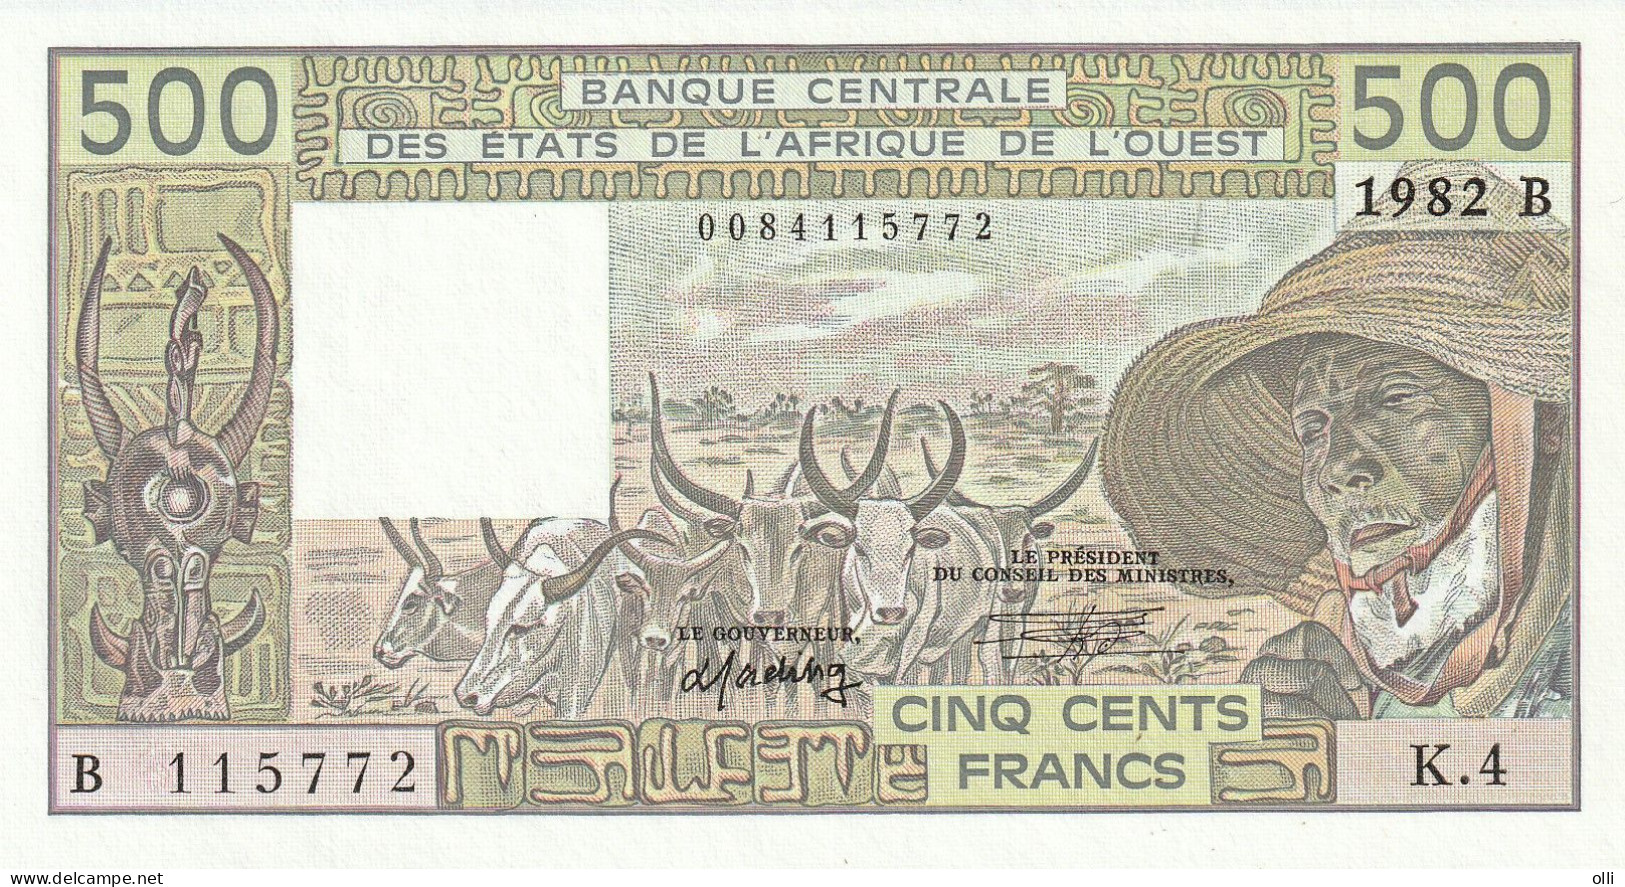 WEST AFRICAN STATES  BENIN 500 FRANCS  1982   P-206B D  UNC - Stati Dell'Africa Occidentale